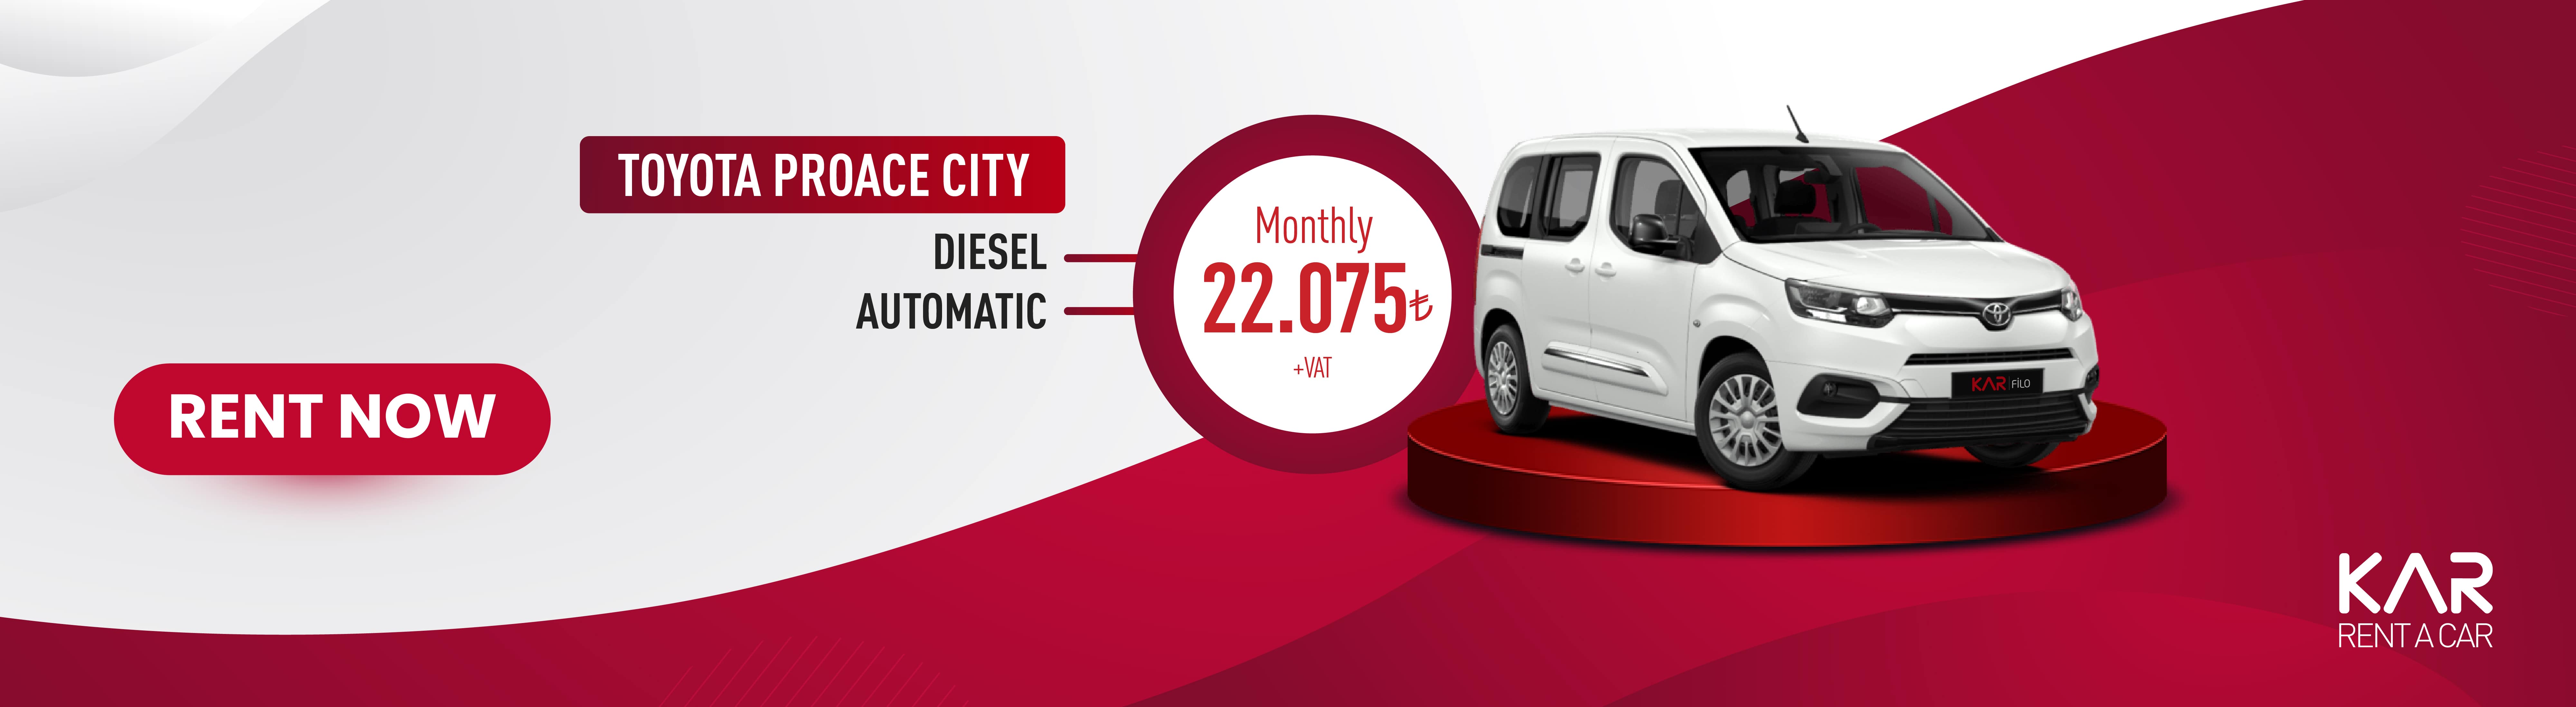 Toyota Proace City March Campaign